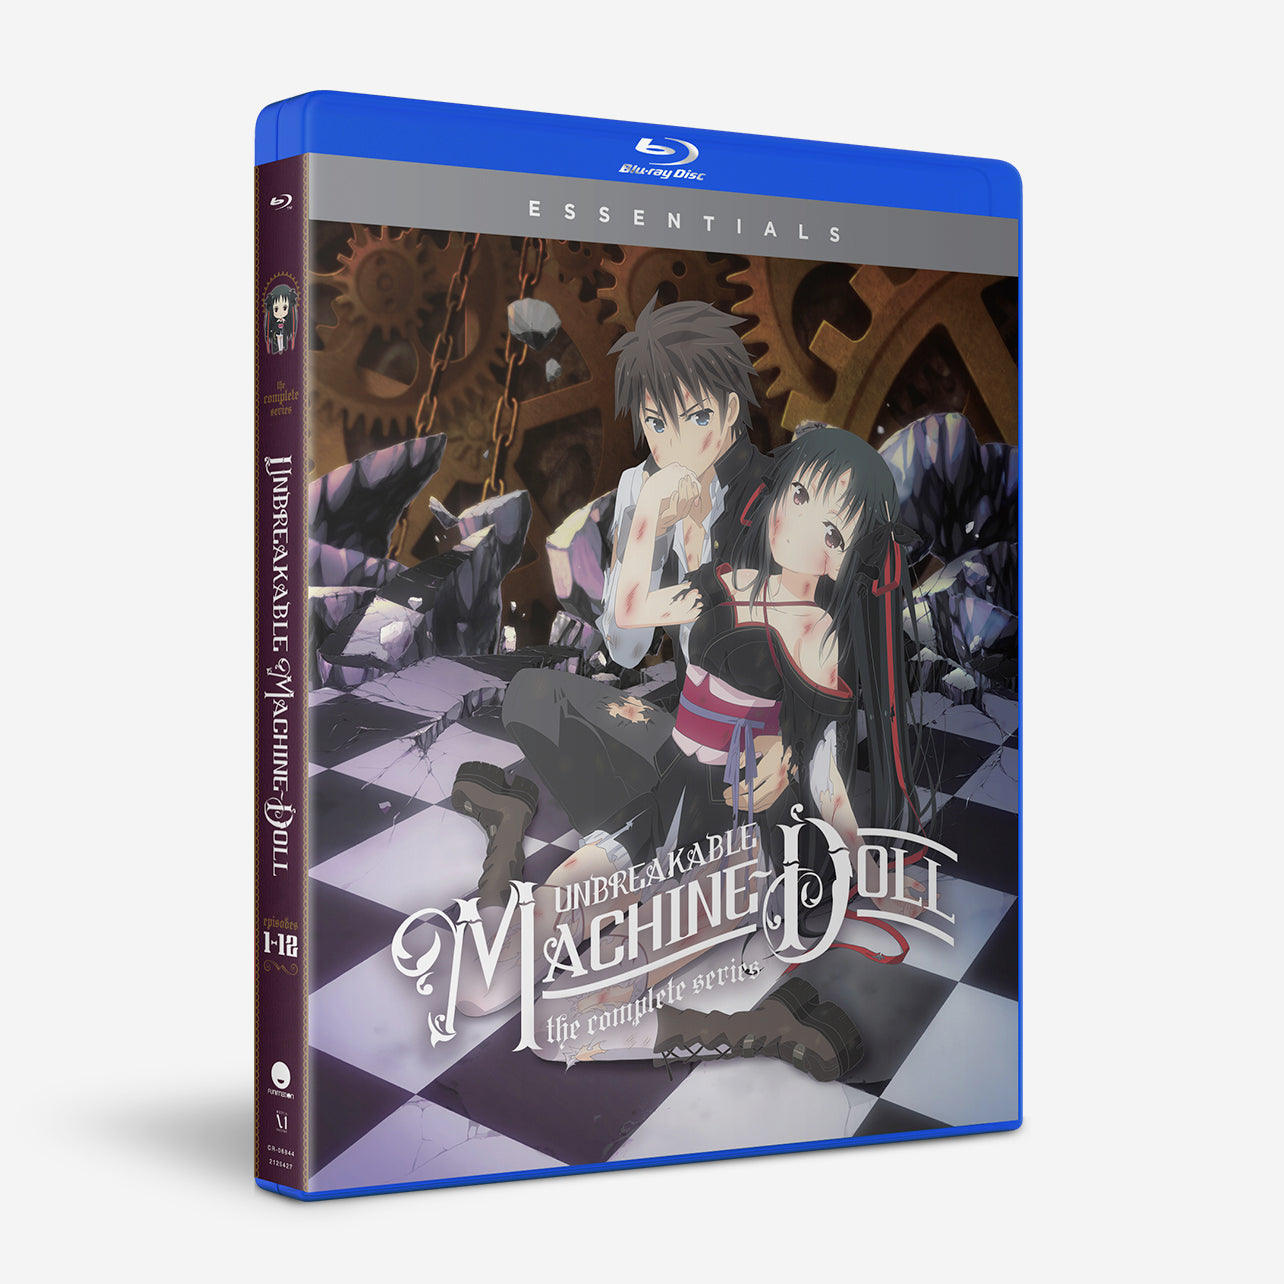 Unbreakable Machine-Doll - The Complete Series - Essentials - Blu-ray image count 0